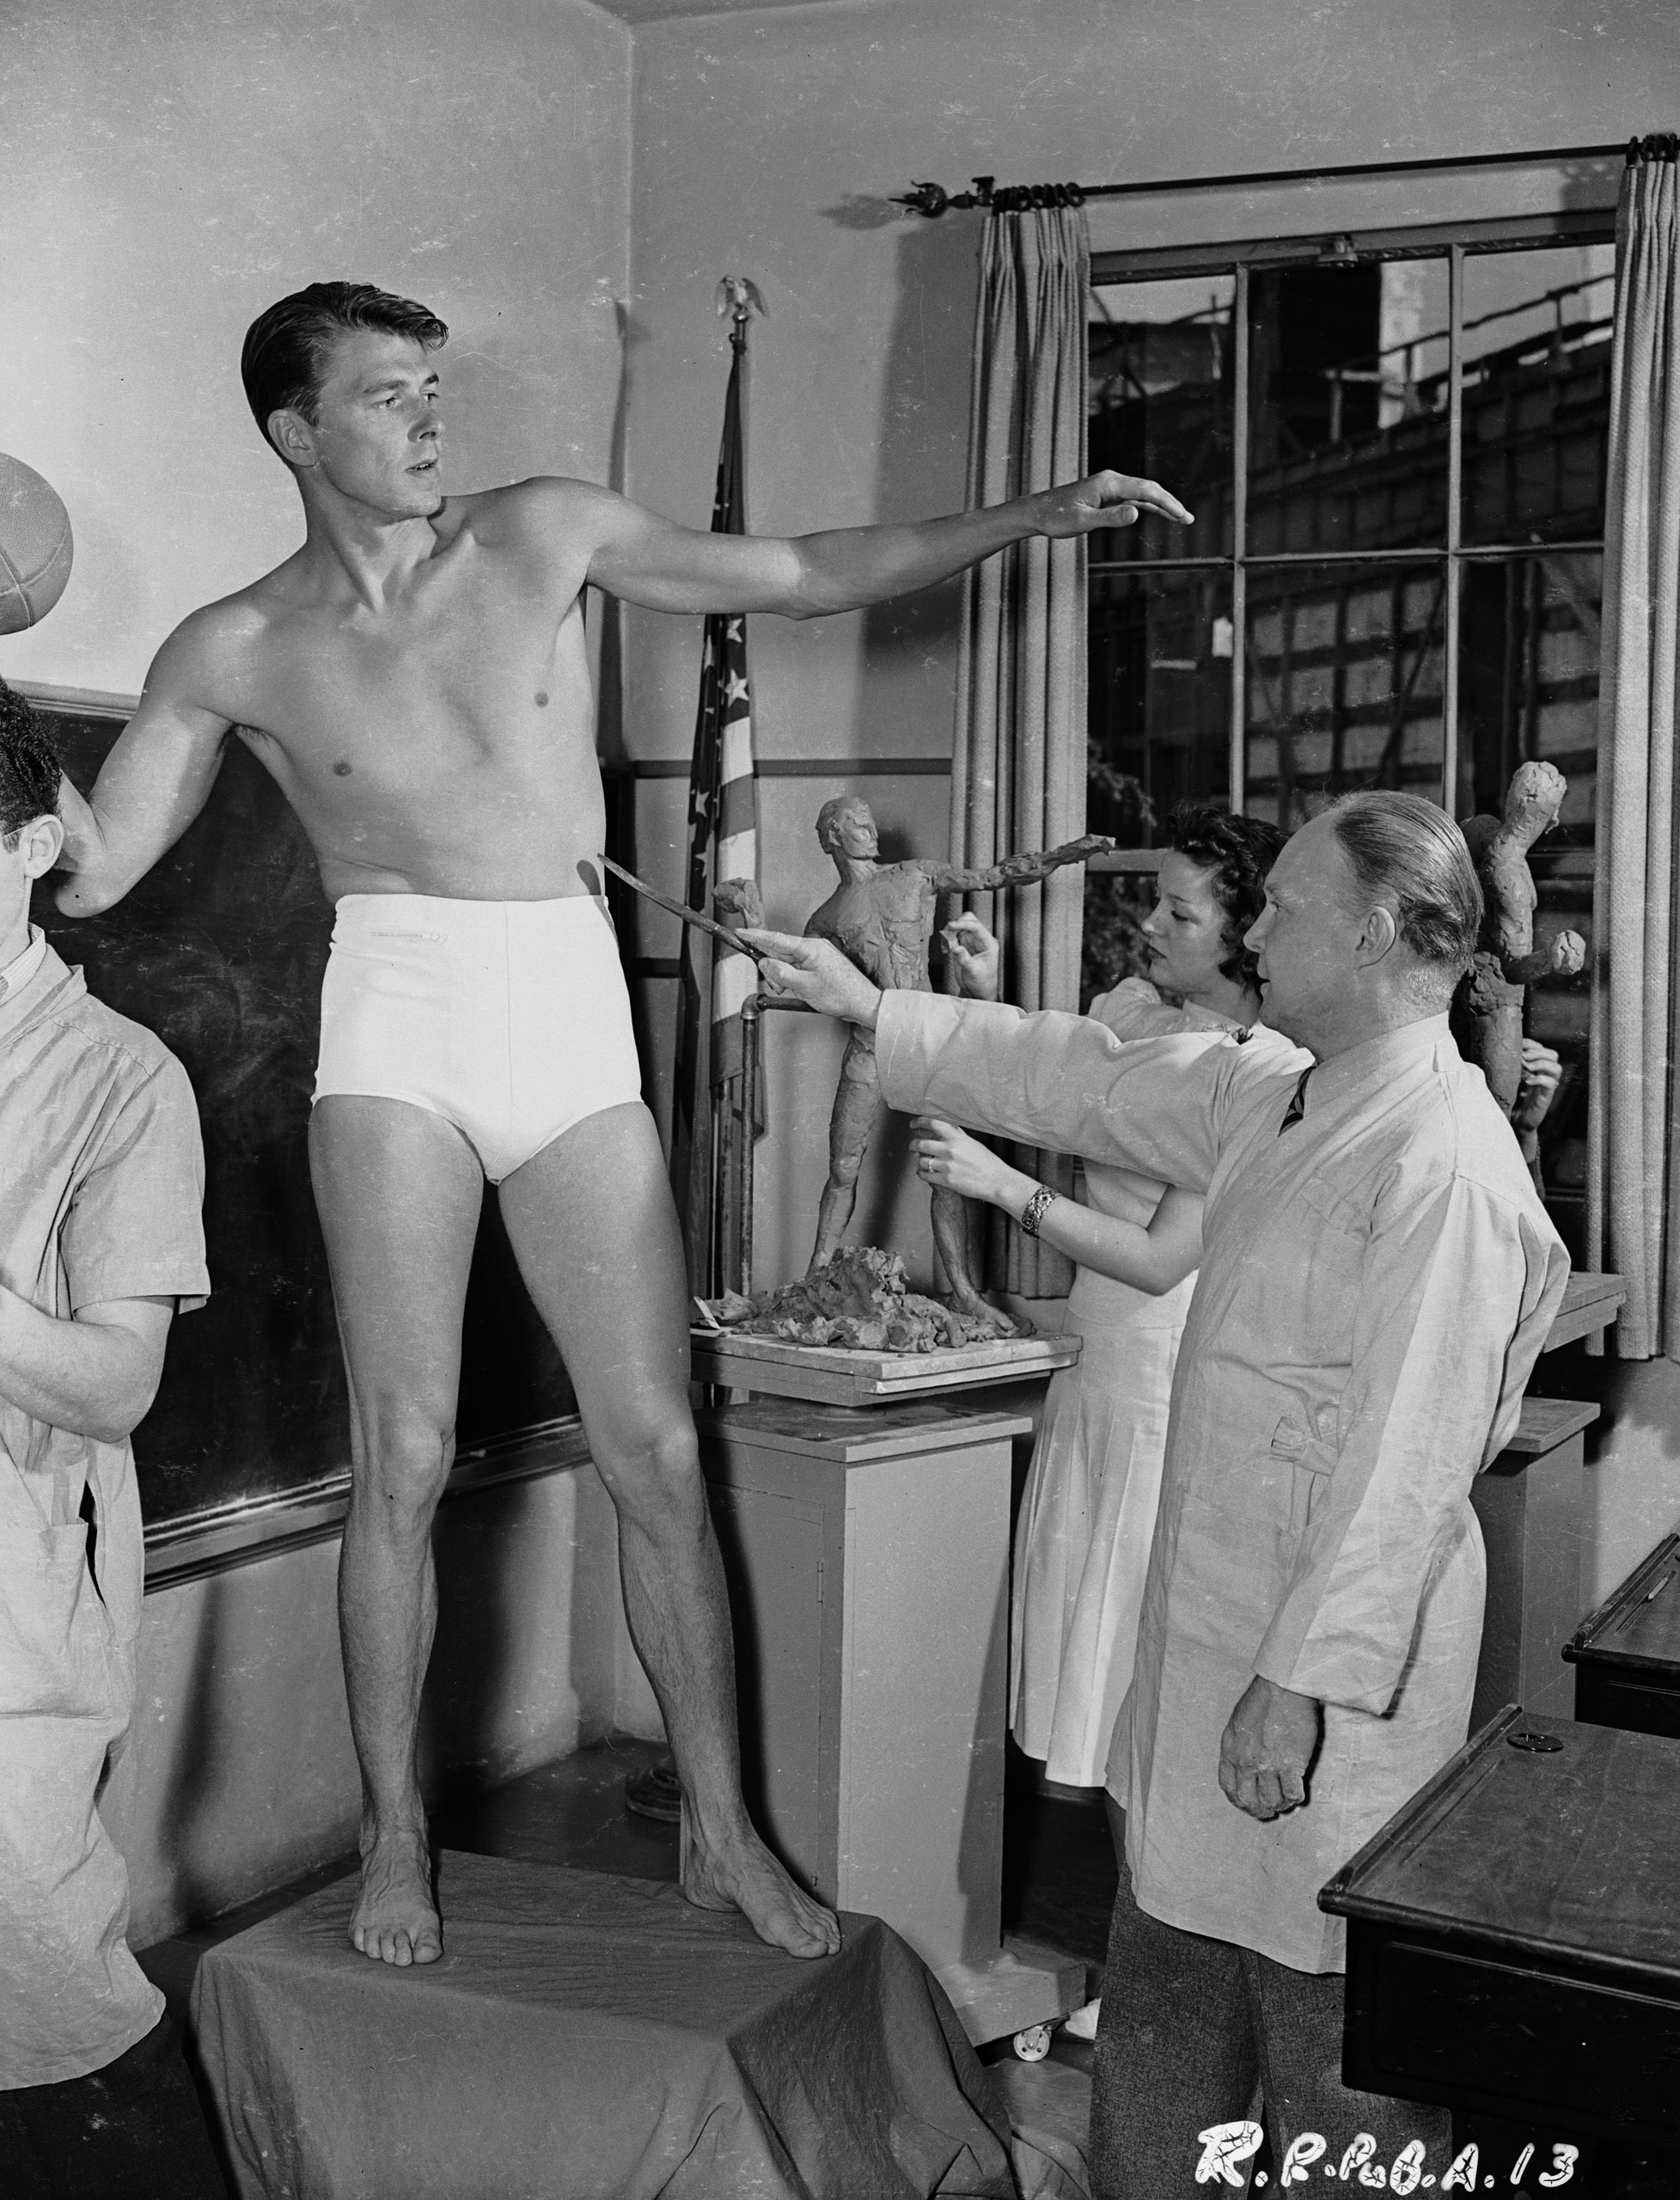 American leading man and future US President, Ronald Reagan modelling for a sculpture, circa 1939.